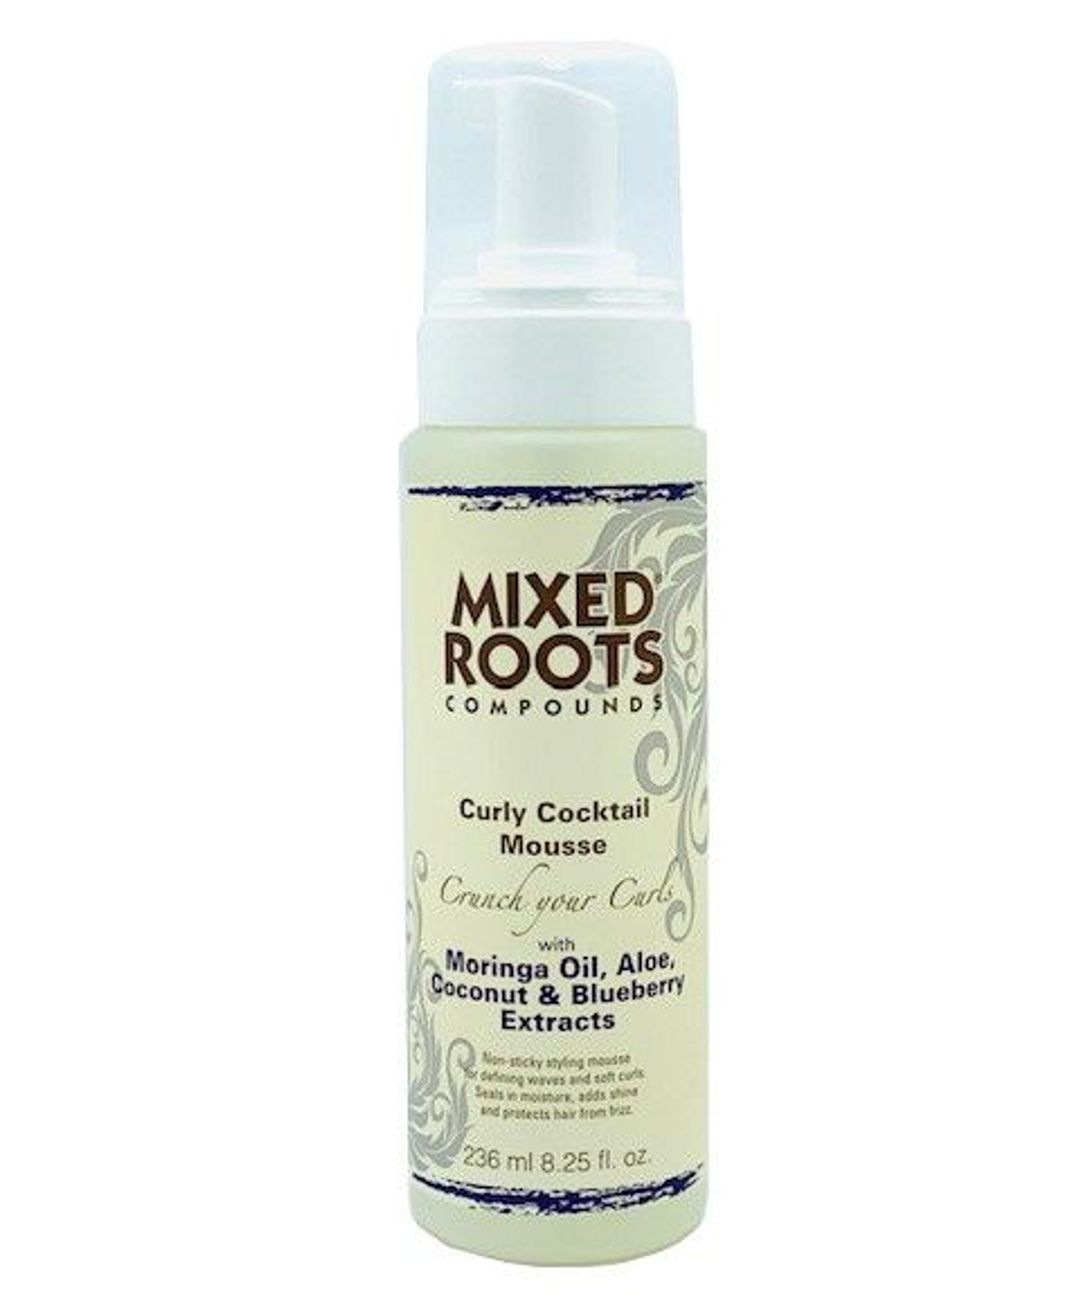 Mixed Roots - Compounds Curly Cocktail Mousse With Moringa Oil, Aloe, Coconut & Blueberry Extracts 236ml